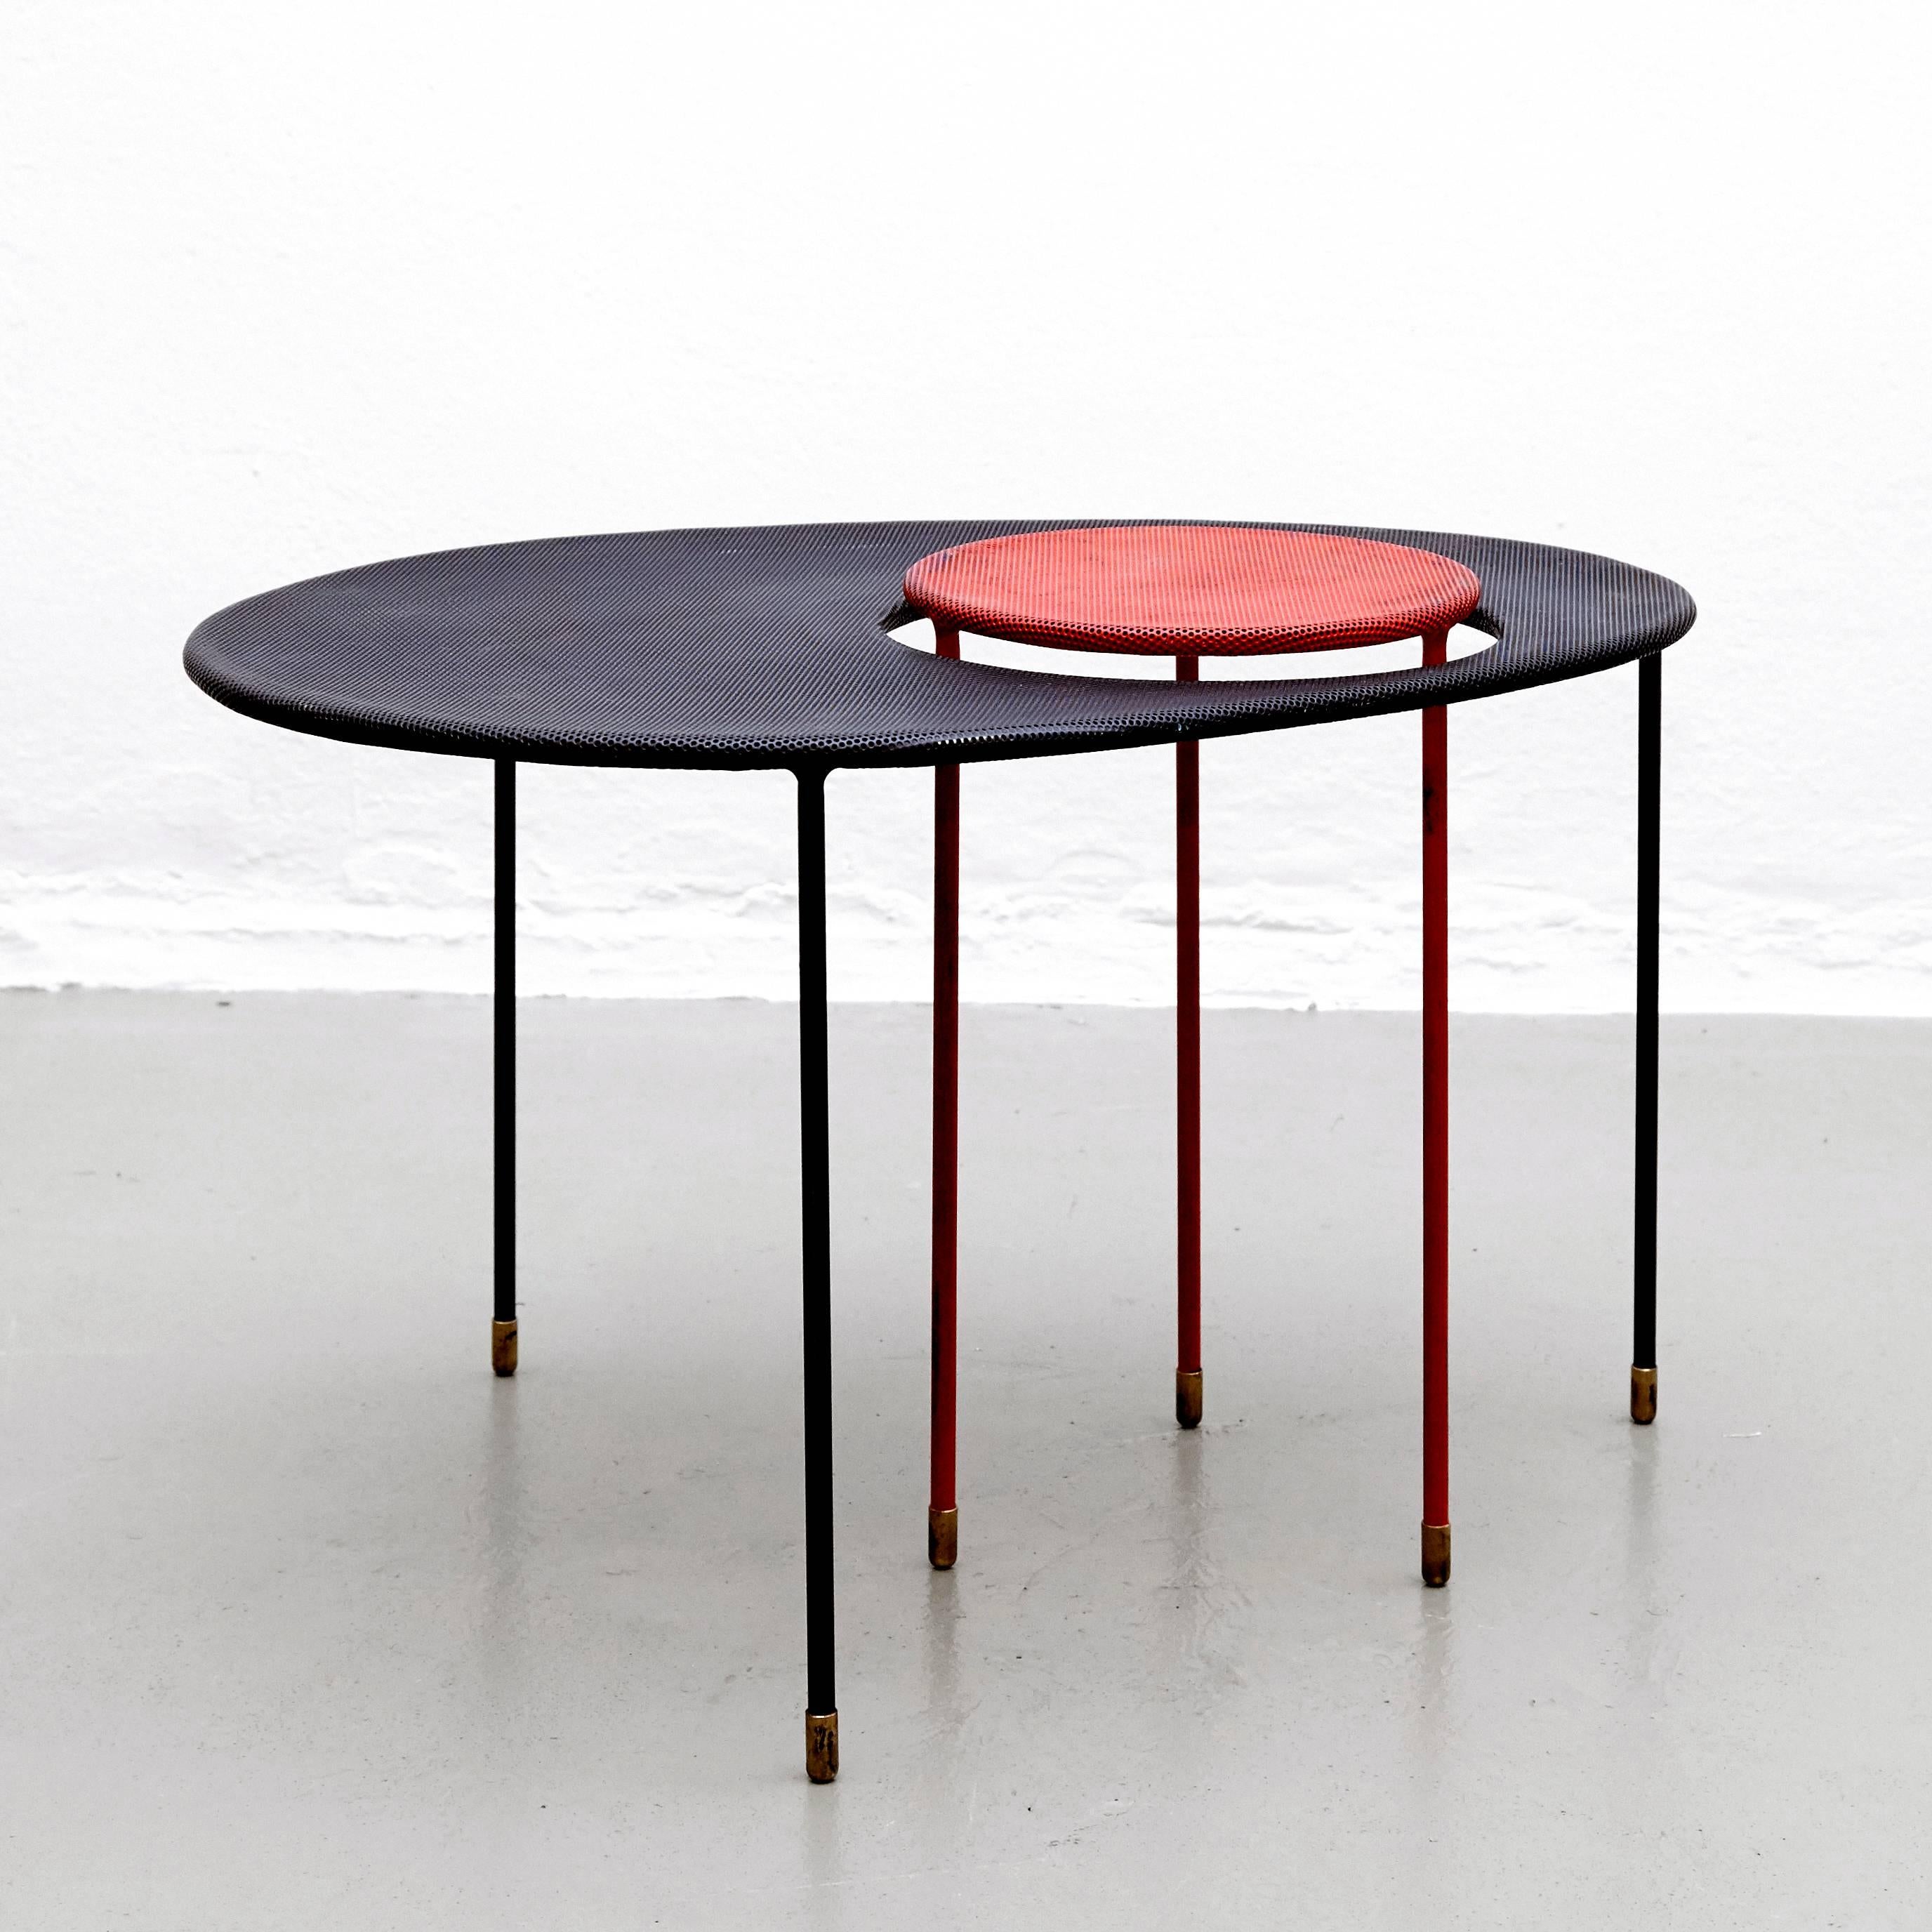 Nesting tables, model Kangourou, designed by Mathieu Matégot.
Manufactured by his son Patrice Matégot, France, circa 2000 before it went into production again.
Folded, perforated metal, lacquered in red and black.

In good original condition,